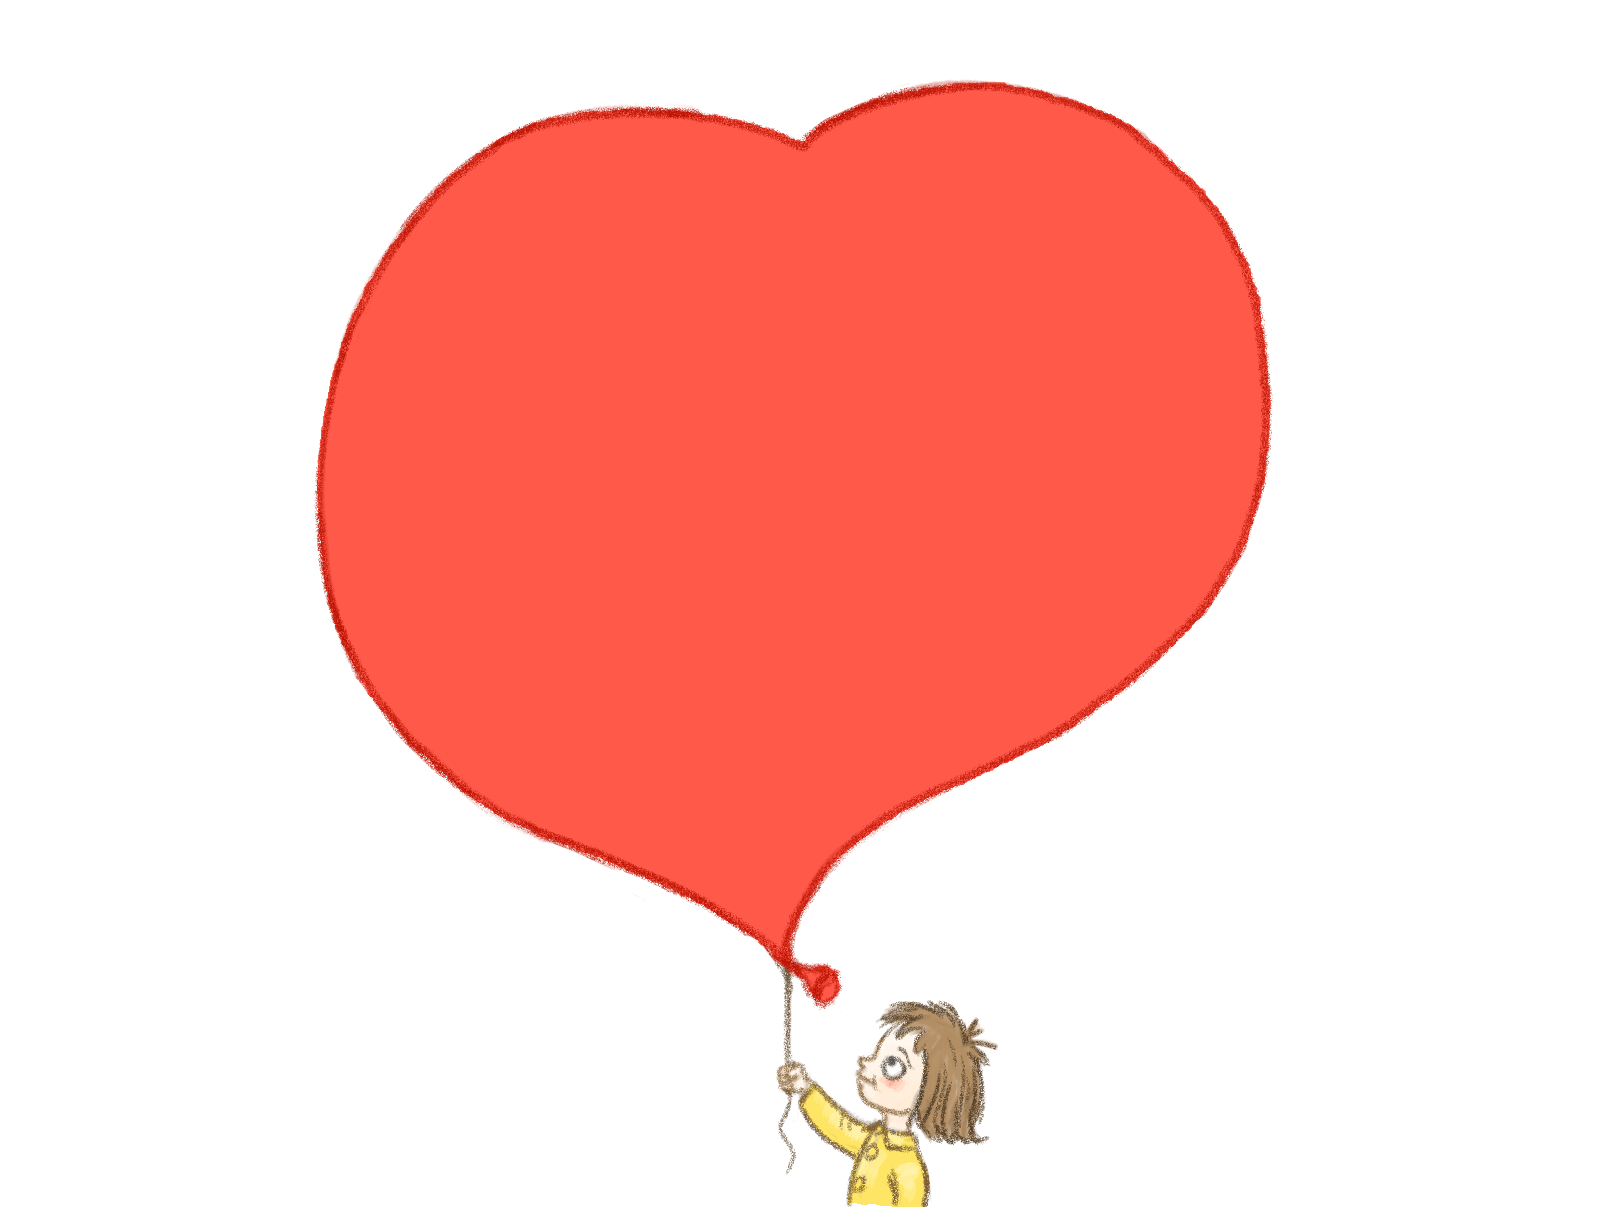 Girl holding a red heart balloon